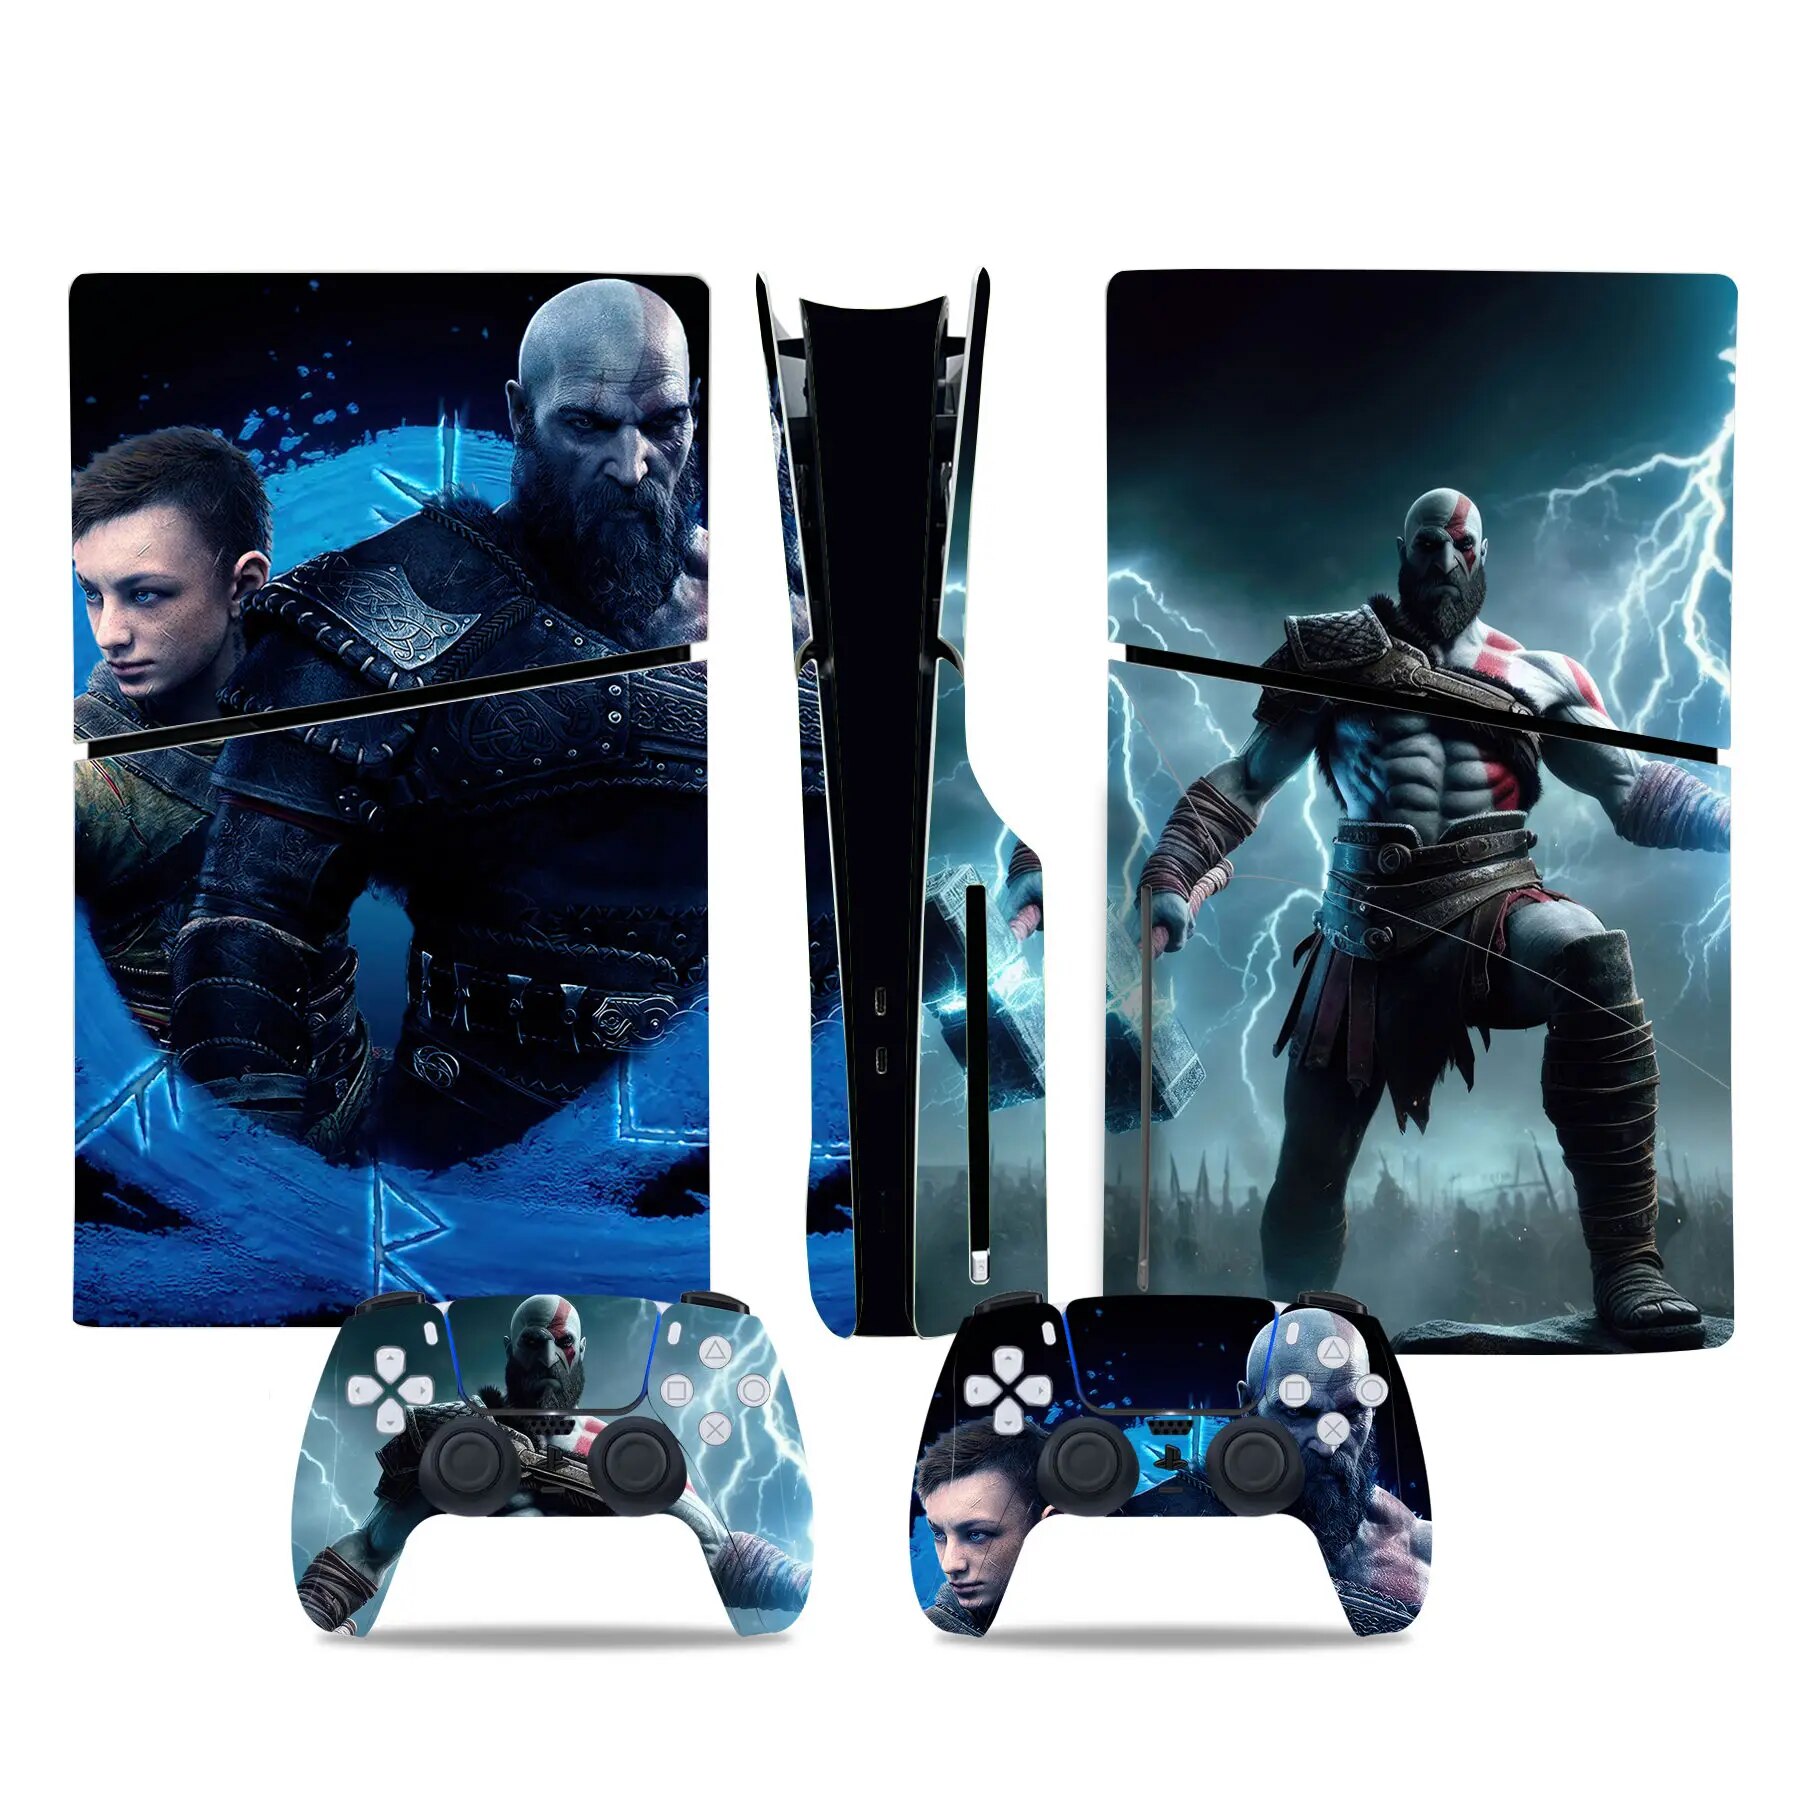 【Exclusive Online Deals】 Of War Game Ps5 Disk Disc Decal Skin Sticker For New Ps5 Console And Two Controllers Vinyl